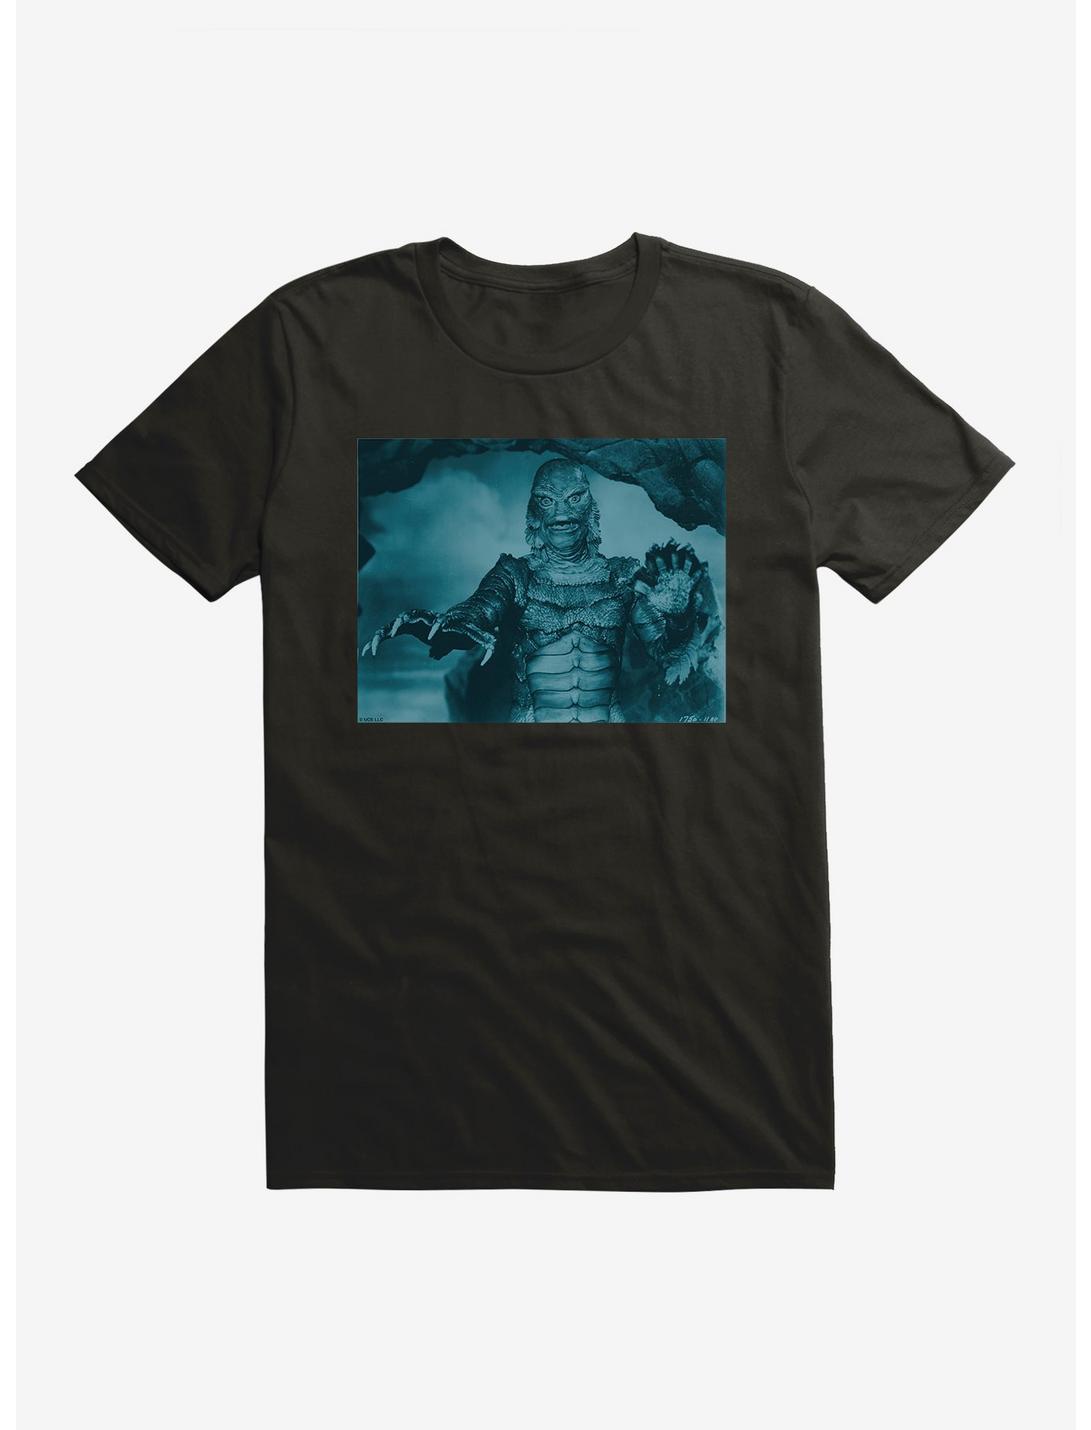 Creature From The Black Lagoon Live Action Blue Scene T-Shirt, BLACK, hi-res